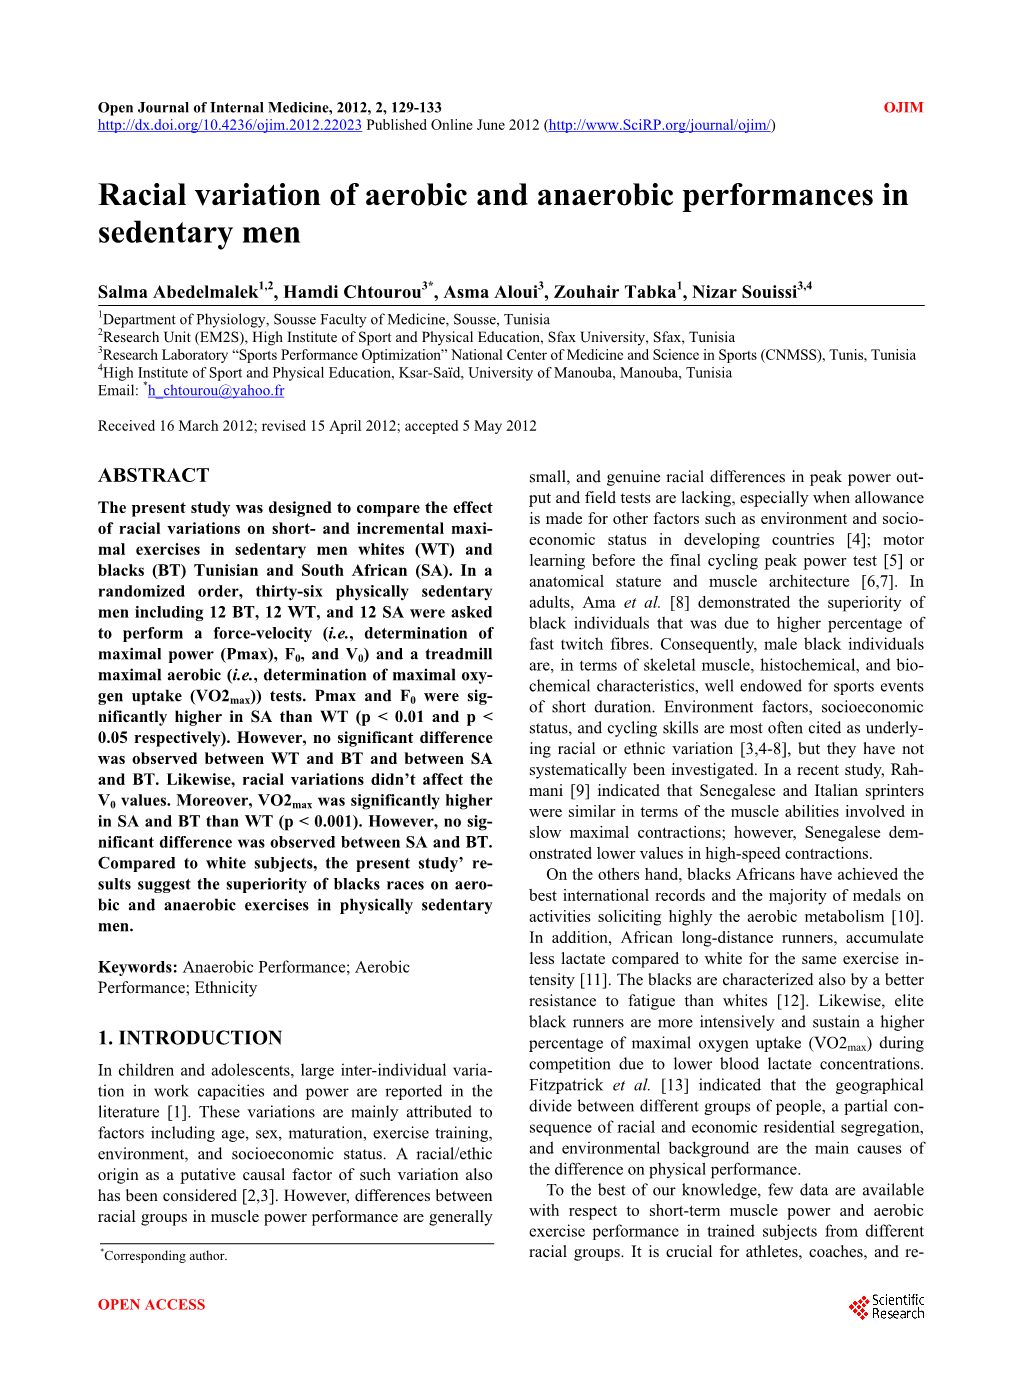 Racial Variation of Aerobic and Anaerobic Performances in Sedentary Men